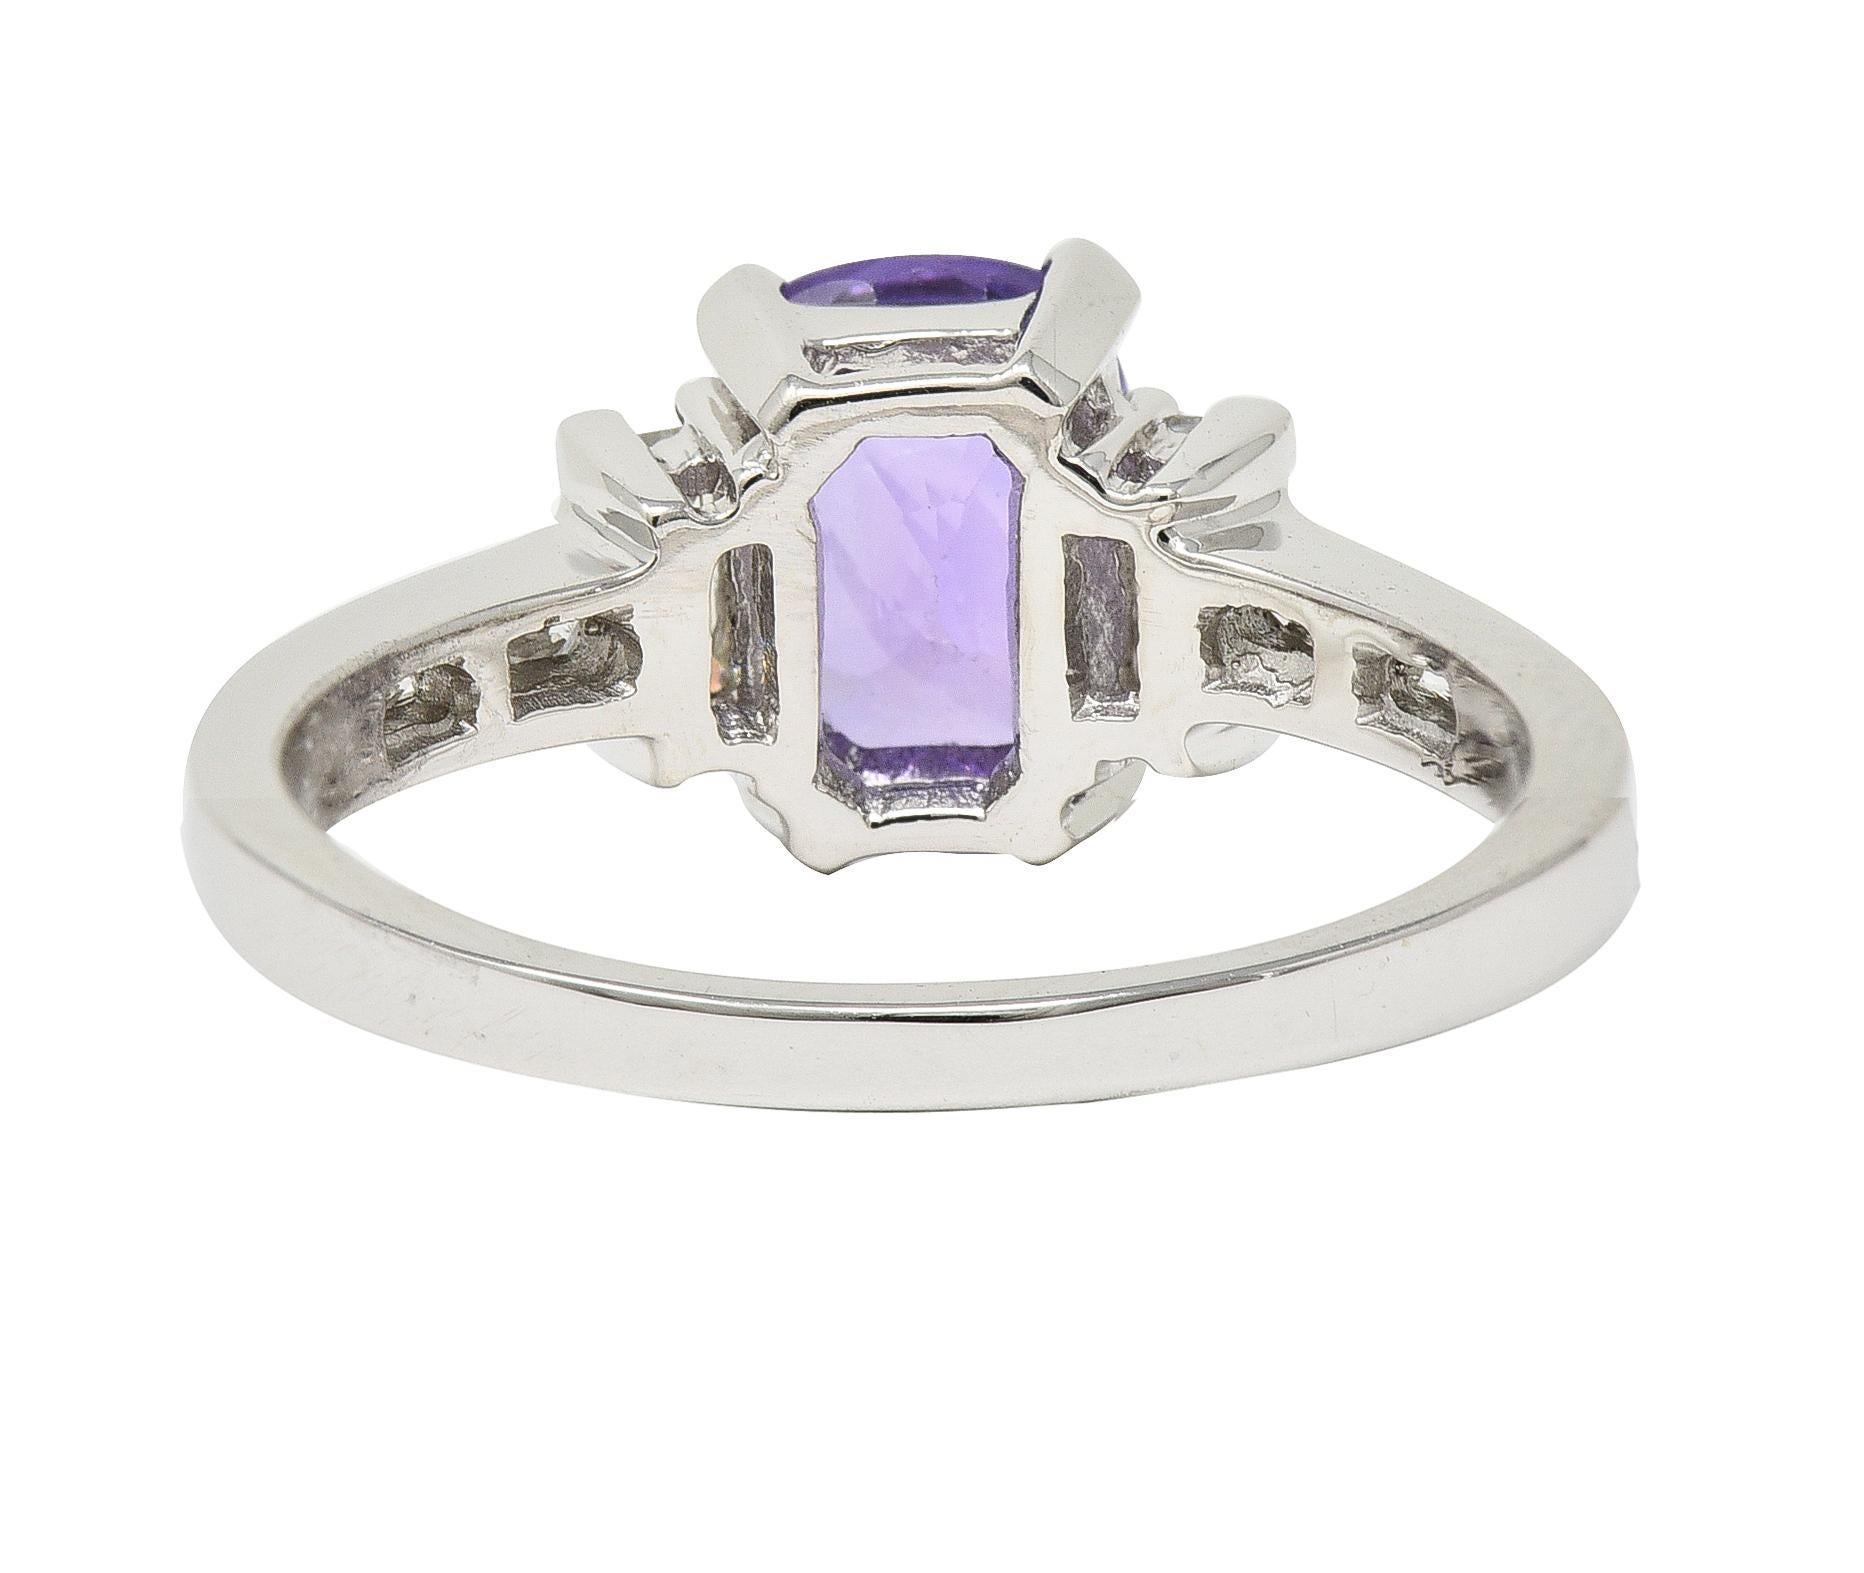 Contemporary 3.12 CTW Purple Sapphire Diamond 18K White Gold Gemstone Ring GIA In Excellent Condition For Sale In Philadelphia, PA